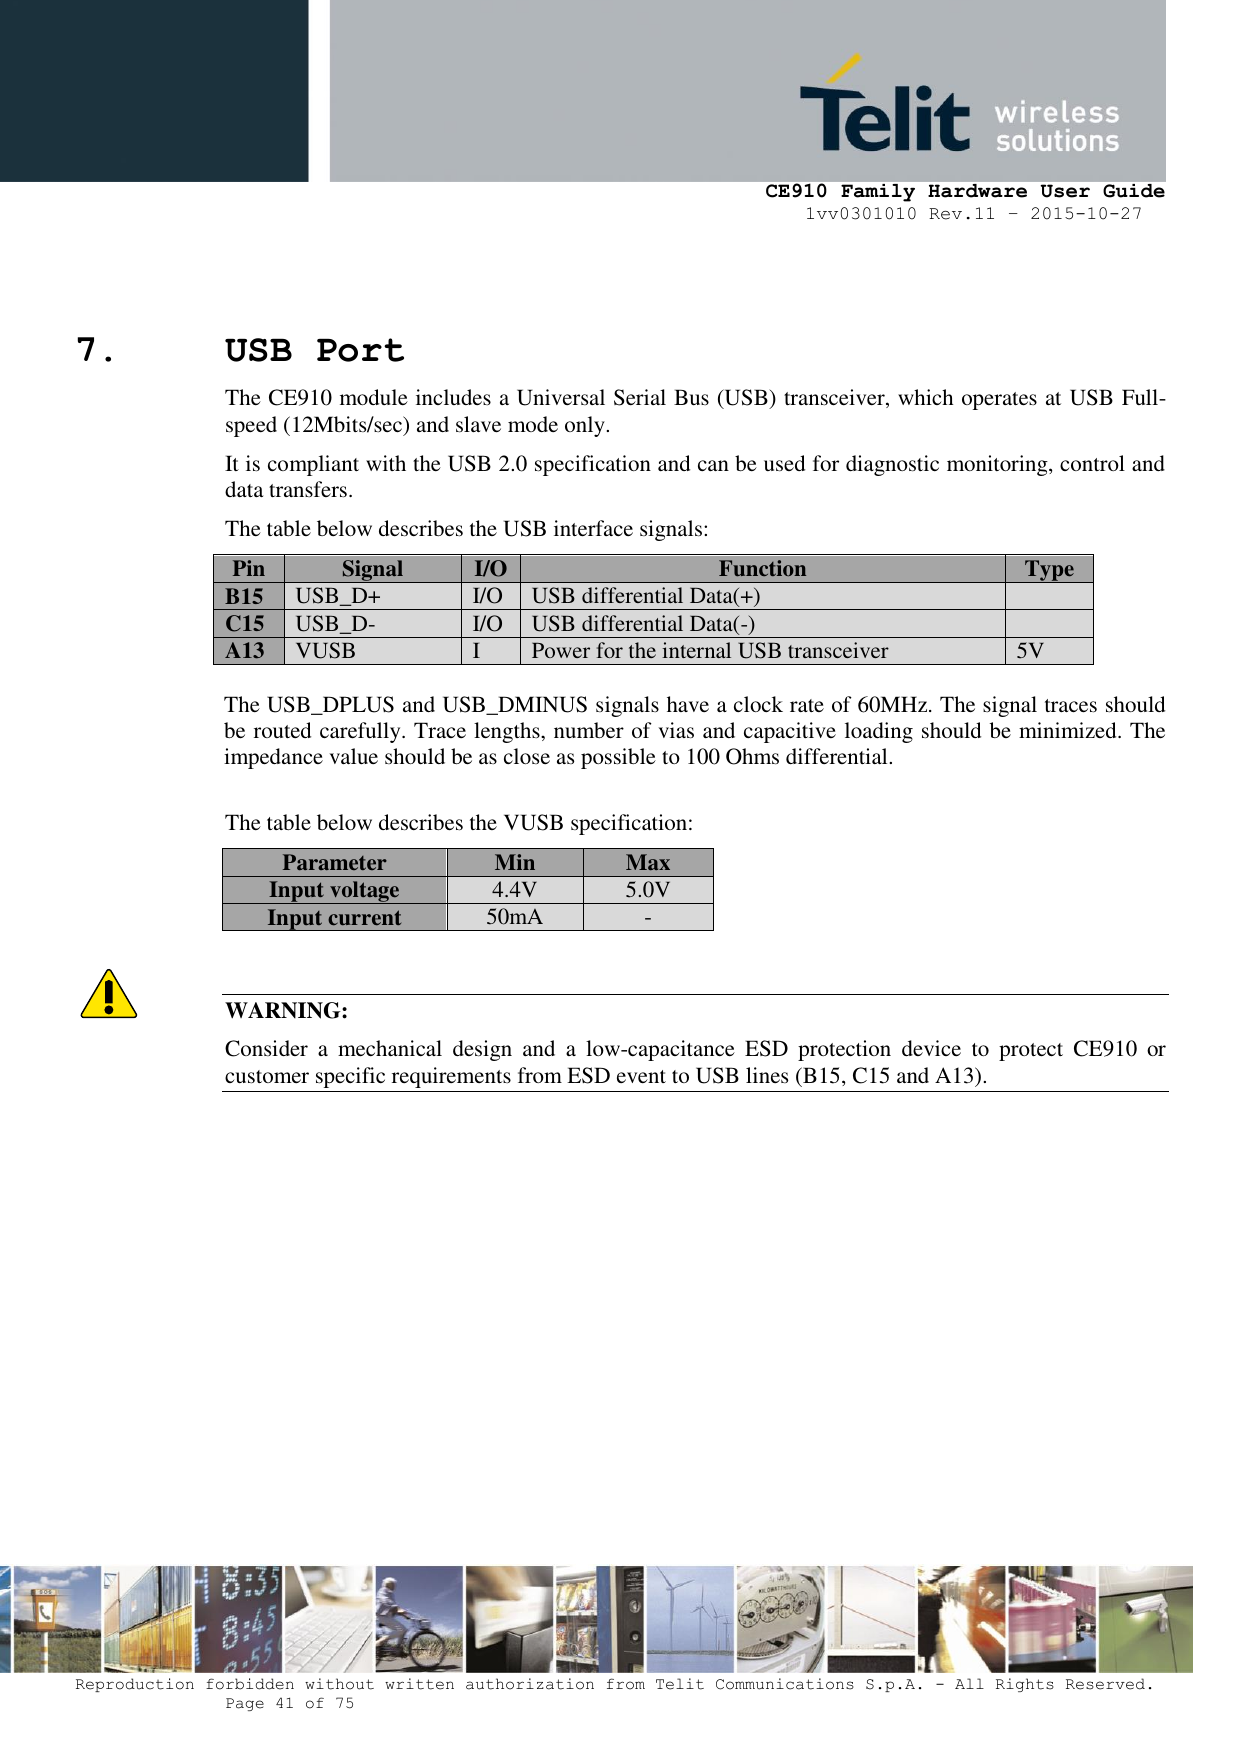     CE910 Family Hardware User Guide 1vv0301010 Rev.11 – 2015-10-27 Reproduction forbidden without written authorization from Telit Communications S.p.A. - All Rights Reserved.    Page 41 of 75                                                     7. USB Port The CE910 module includes a Universal Serial Bus (USB) transceiver, which operates at USB Full-speed (12Mbits/sec) and slave mode only.  It is compliant with the USB 2.0 specification and can be used for diagnostic monitoring, control and data transfers. The table below describes the USB interface signals: Pin Signal I/O Function Type B15 USB_D+ I/O USB differential Data(+)  C15 USB_D- I/O USB differential Data(-)  A13 VUSB I Power for the internal USB transceiver 5V  The USB_DPLUS and USB_DMINUS signals have a clock rate of 60MHz. The signal traces should be routed carefully. Trace lengths, number of vias and capacitive loading should be minimized. The impedance value should be as close as possible to 100 Ohms differential.  The table below describes the VUSB specification: Parameter Min Max Input voltage 4.4V 5.0V Input current 50mA -   WARNING: Consider  a  mechanical  design  and  a  low-capacitance  ESD  protection  device  to  protect  CE910  or customer specific requirements from ESD event to USB lines (B15, C15 and A13).                 